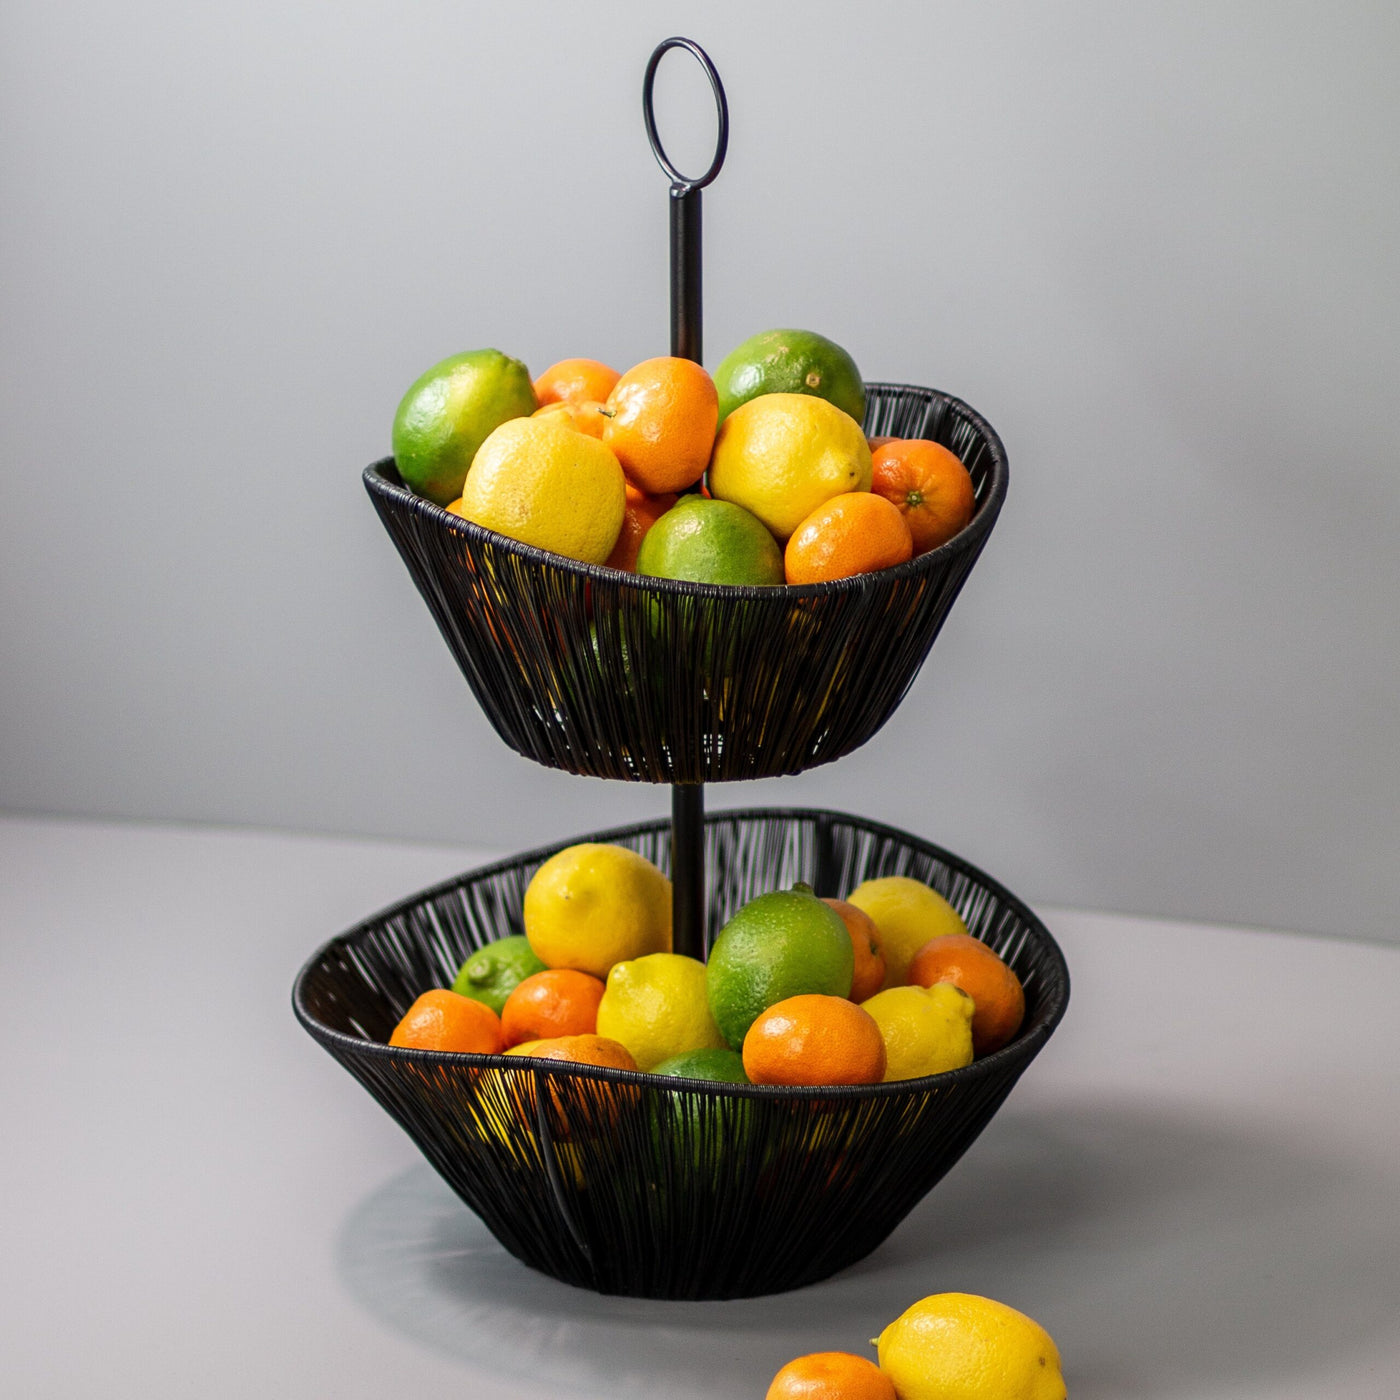 BASKET 2-TIER WIRE (Available in 3 Colors)